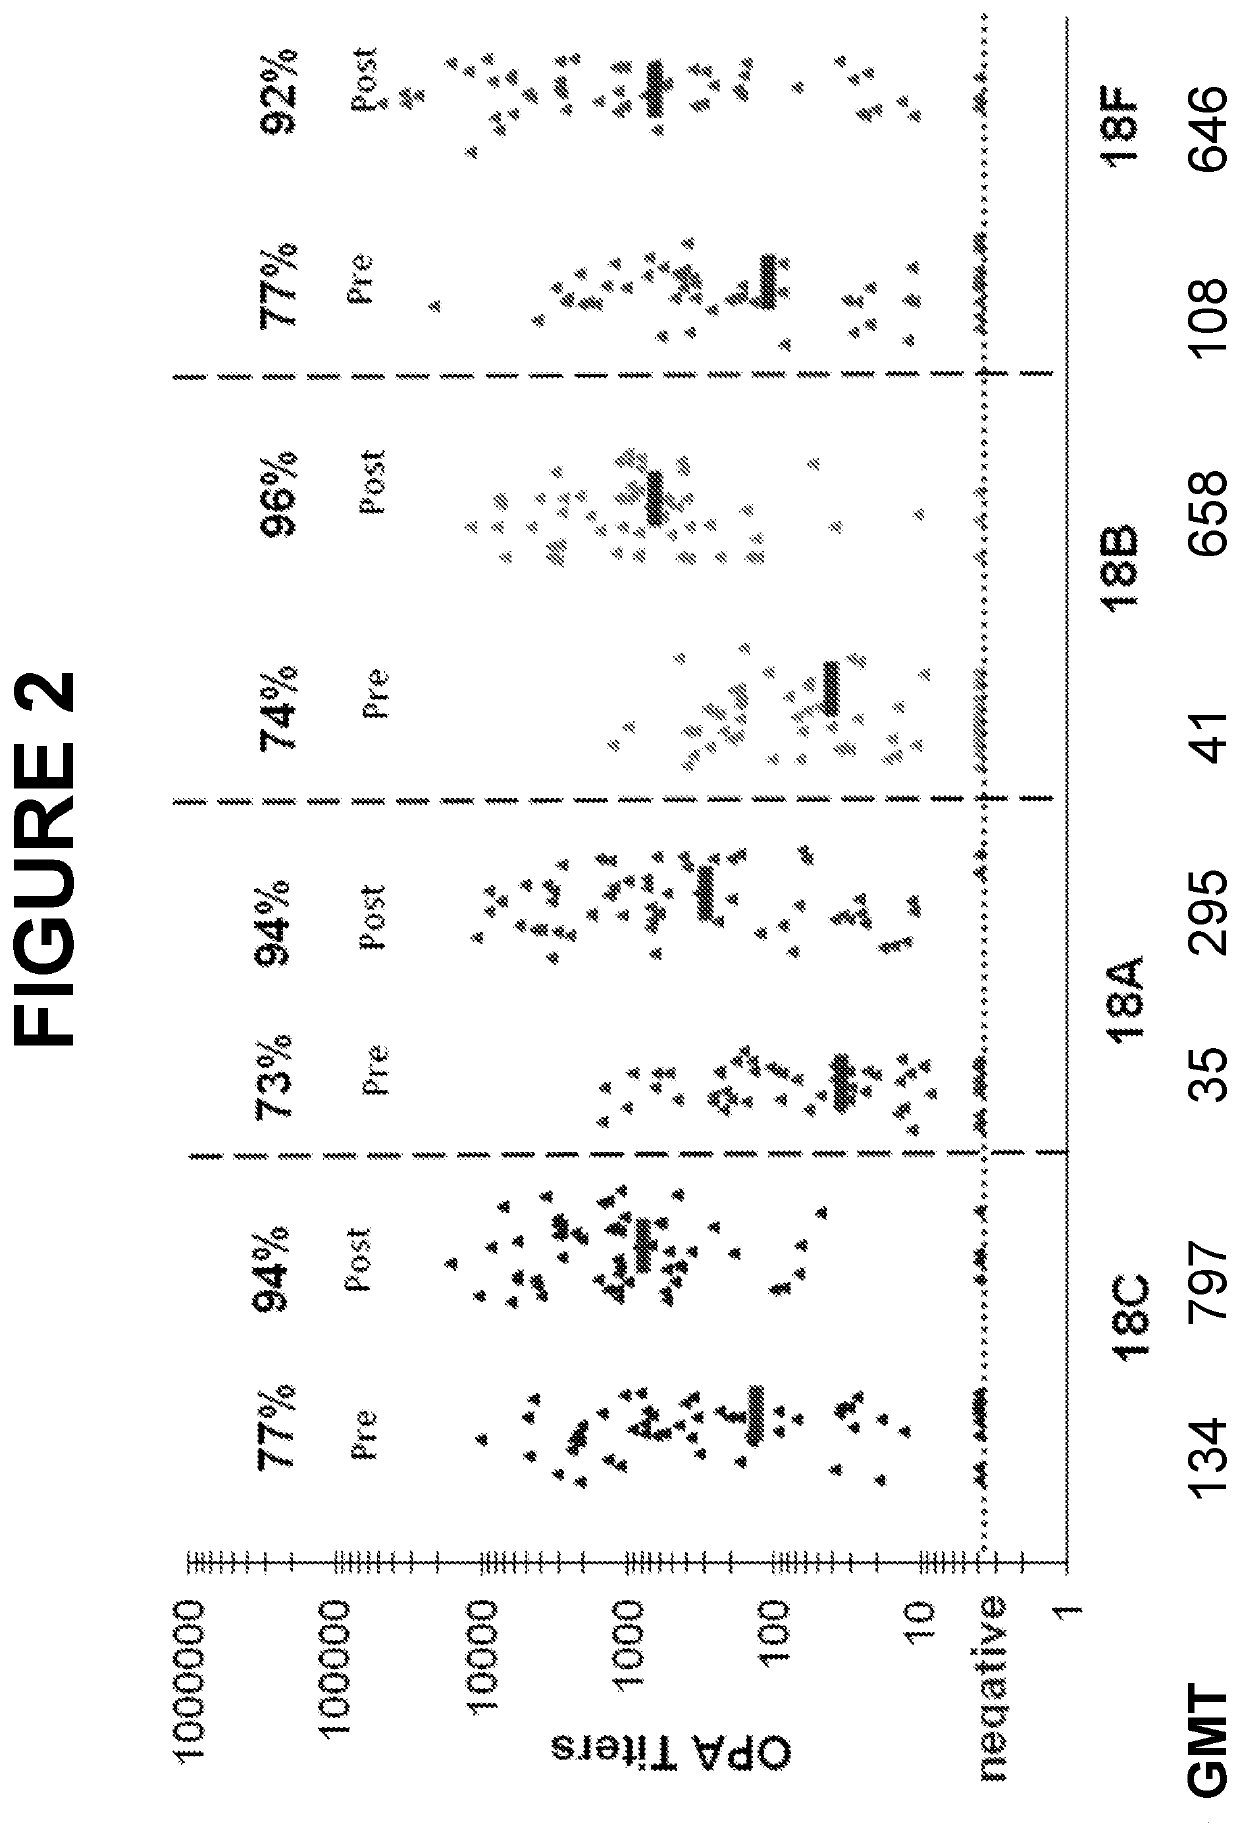 Immunogenic Compositions for Use in Pneumococcal Vaccines